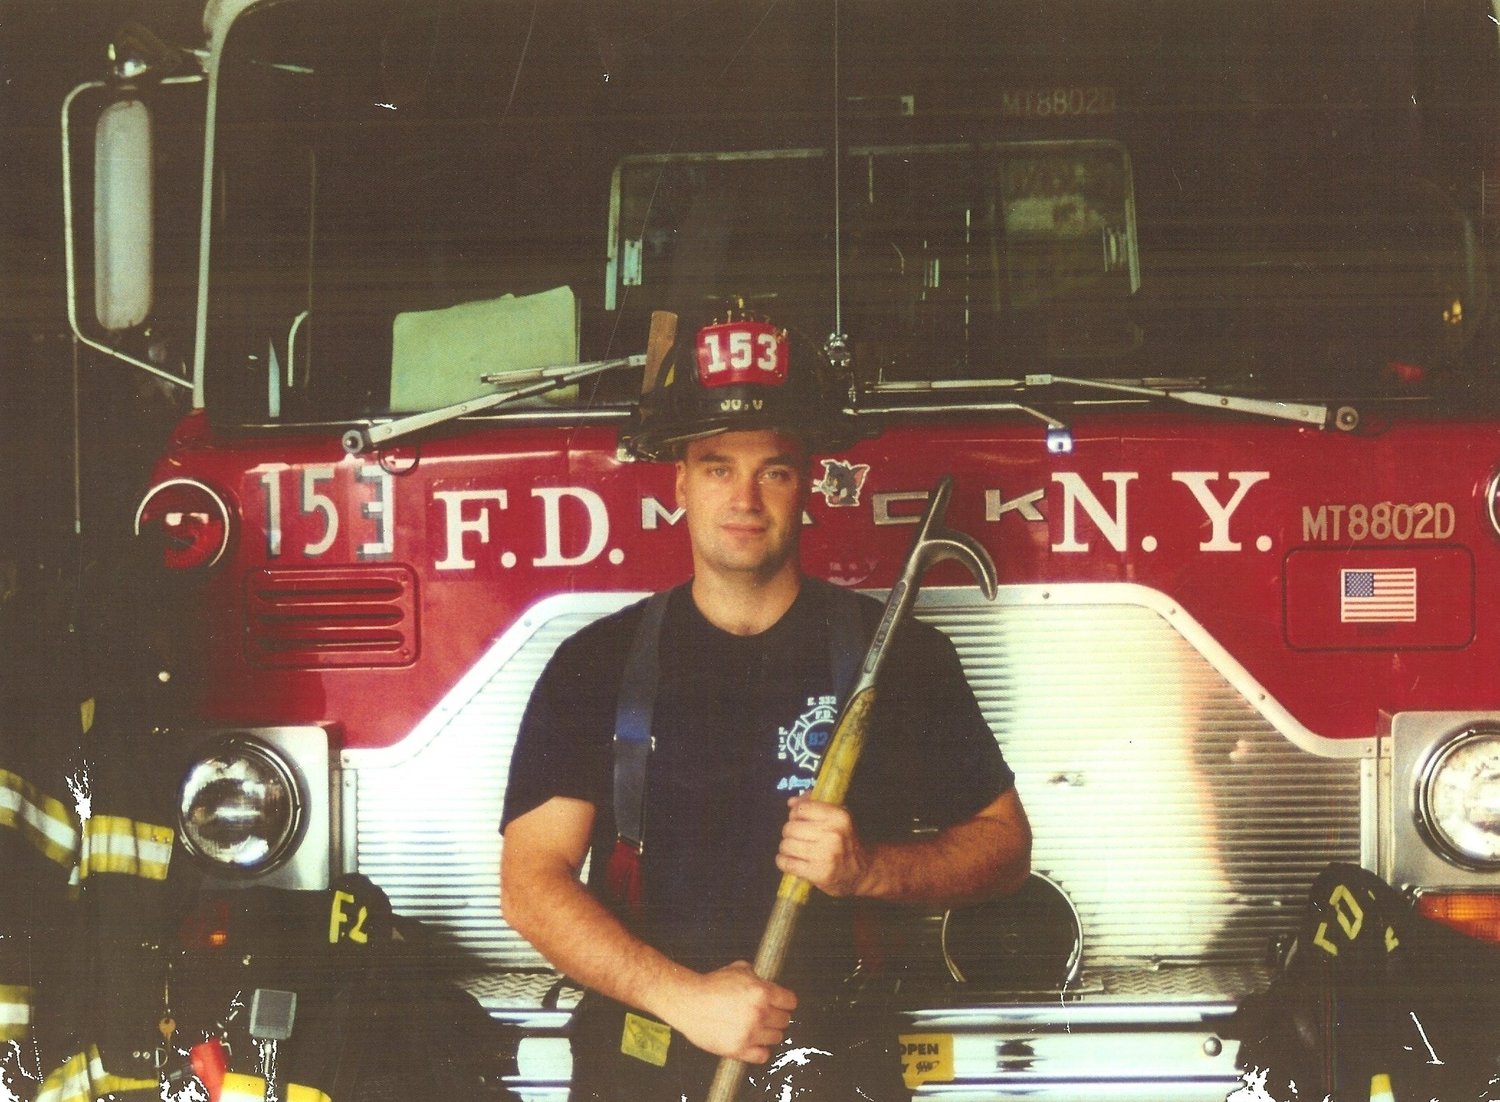 FDNY firefighter Stephen Siller, who grew up in Rockville Centre, died in the World Trade Center on Sept. 11, 2001. His brother, Frank, is walking 537 miles in his honor.